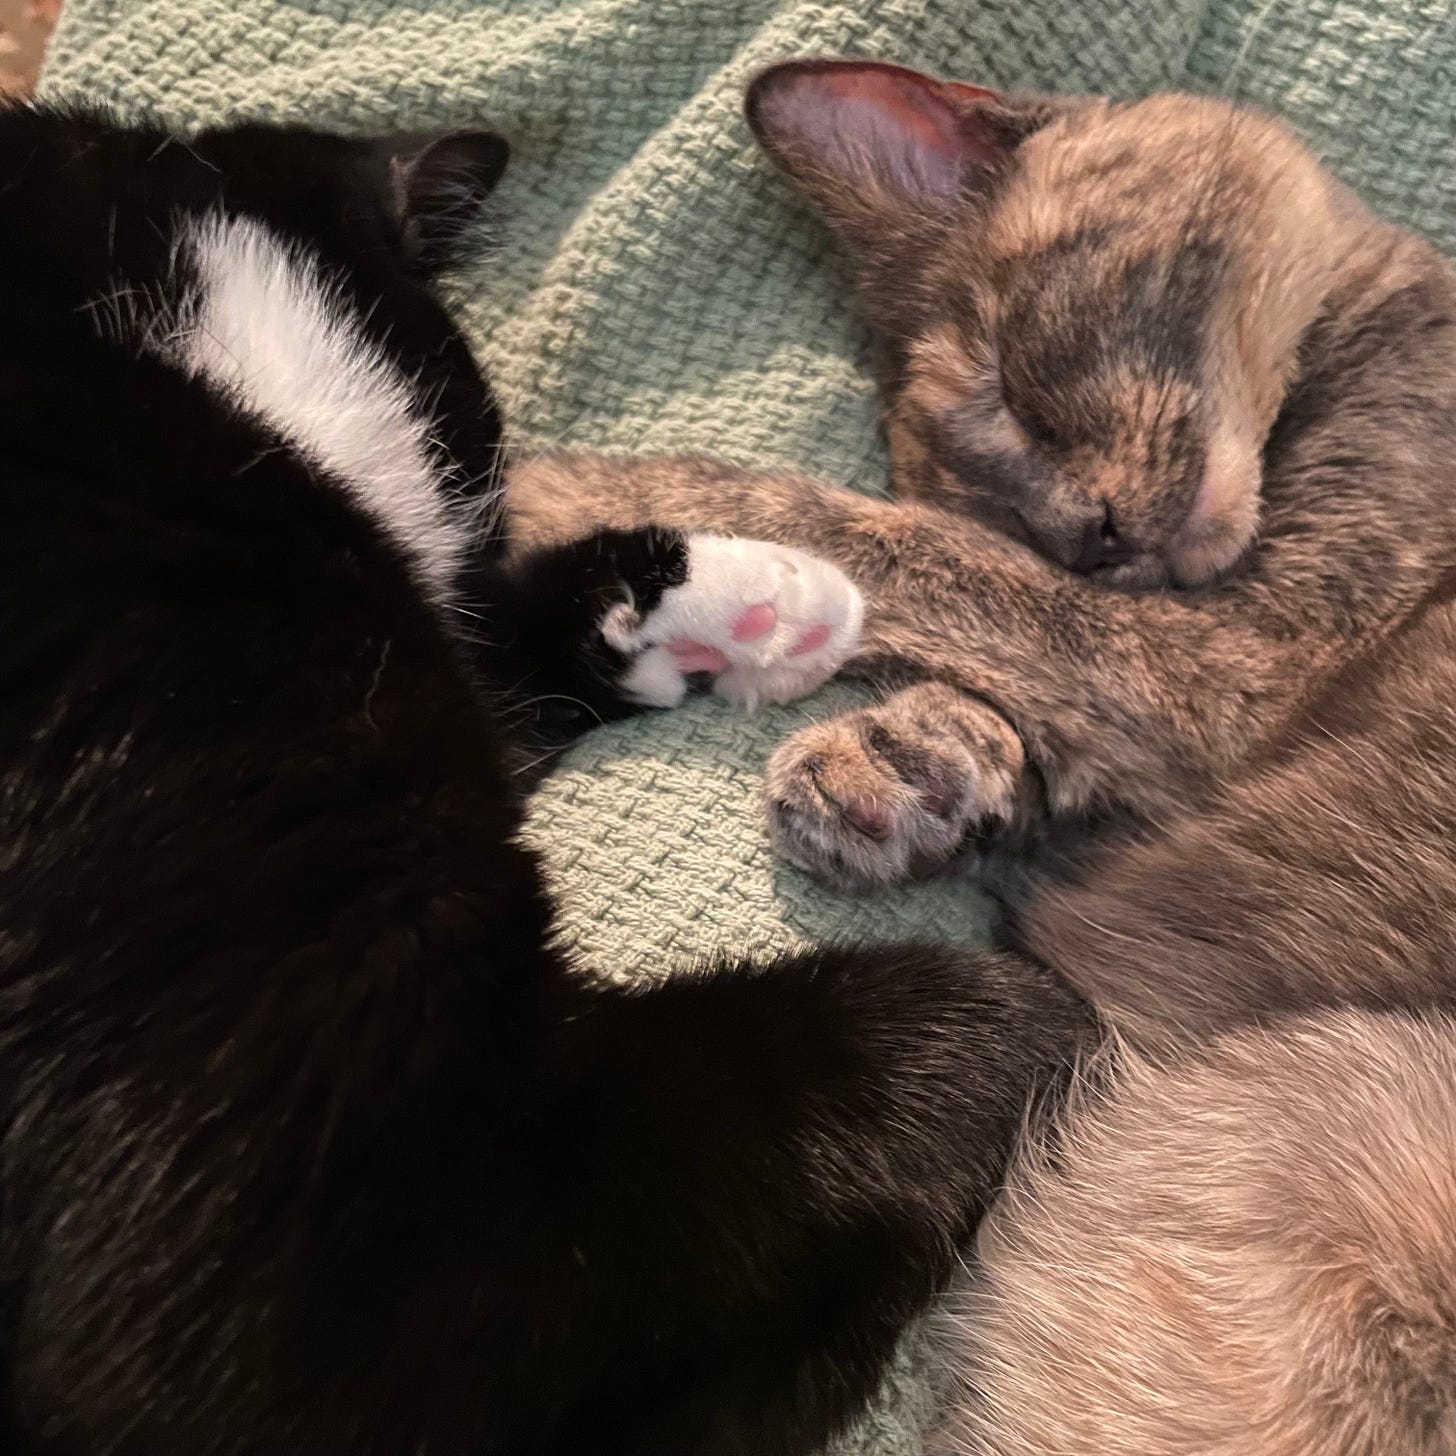 Two cats napping on a sage green blanket. On the left is a tuxedo cat; on the right, a dilute tortie. They are facing each other and holding paws.